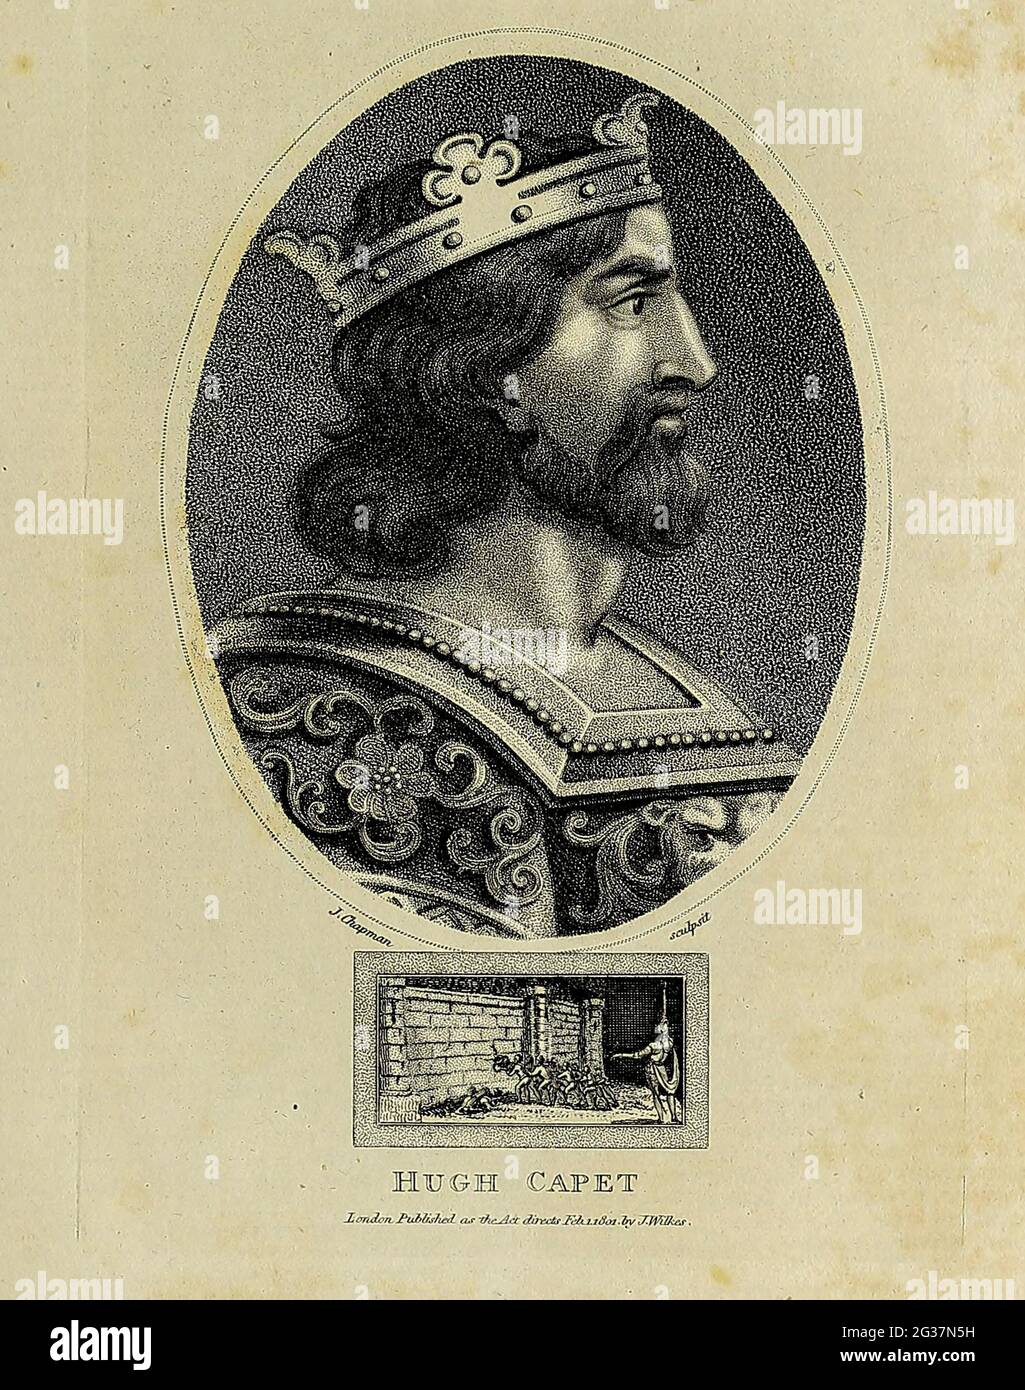 Hugh Capet (c. 939 – 14 October 996) was the King of the Franks from 987 to 996. He is the founder and first king from the House of Capet. The son of the powerful duke Hugh the Great and his wife Hedwige of Saxony, he was elected as the successor of the last Carolingian king, Louis V. Hugh was descended from Charlemagne's sons Louis the Pious and Pepin of Italy through his mother and paternal grandmother, respectively, and was also a nephew of Otto the Great. Copperplate engraving From the Encyclopaedia Londinensis or, Universal dictionary of arts, sciences, and literature; Volume VII;  Edited Stock Photo